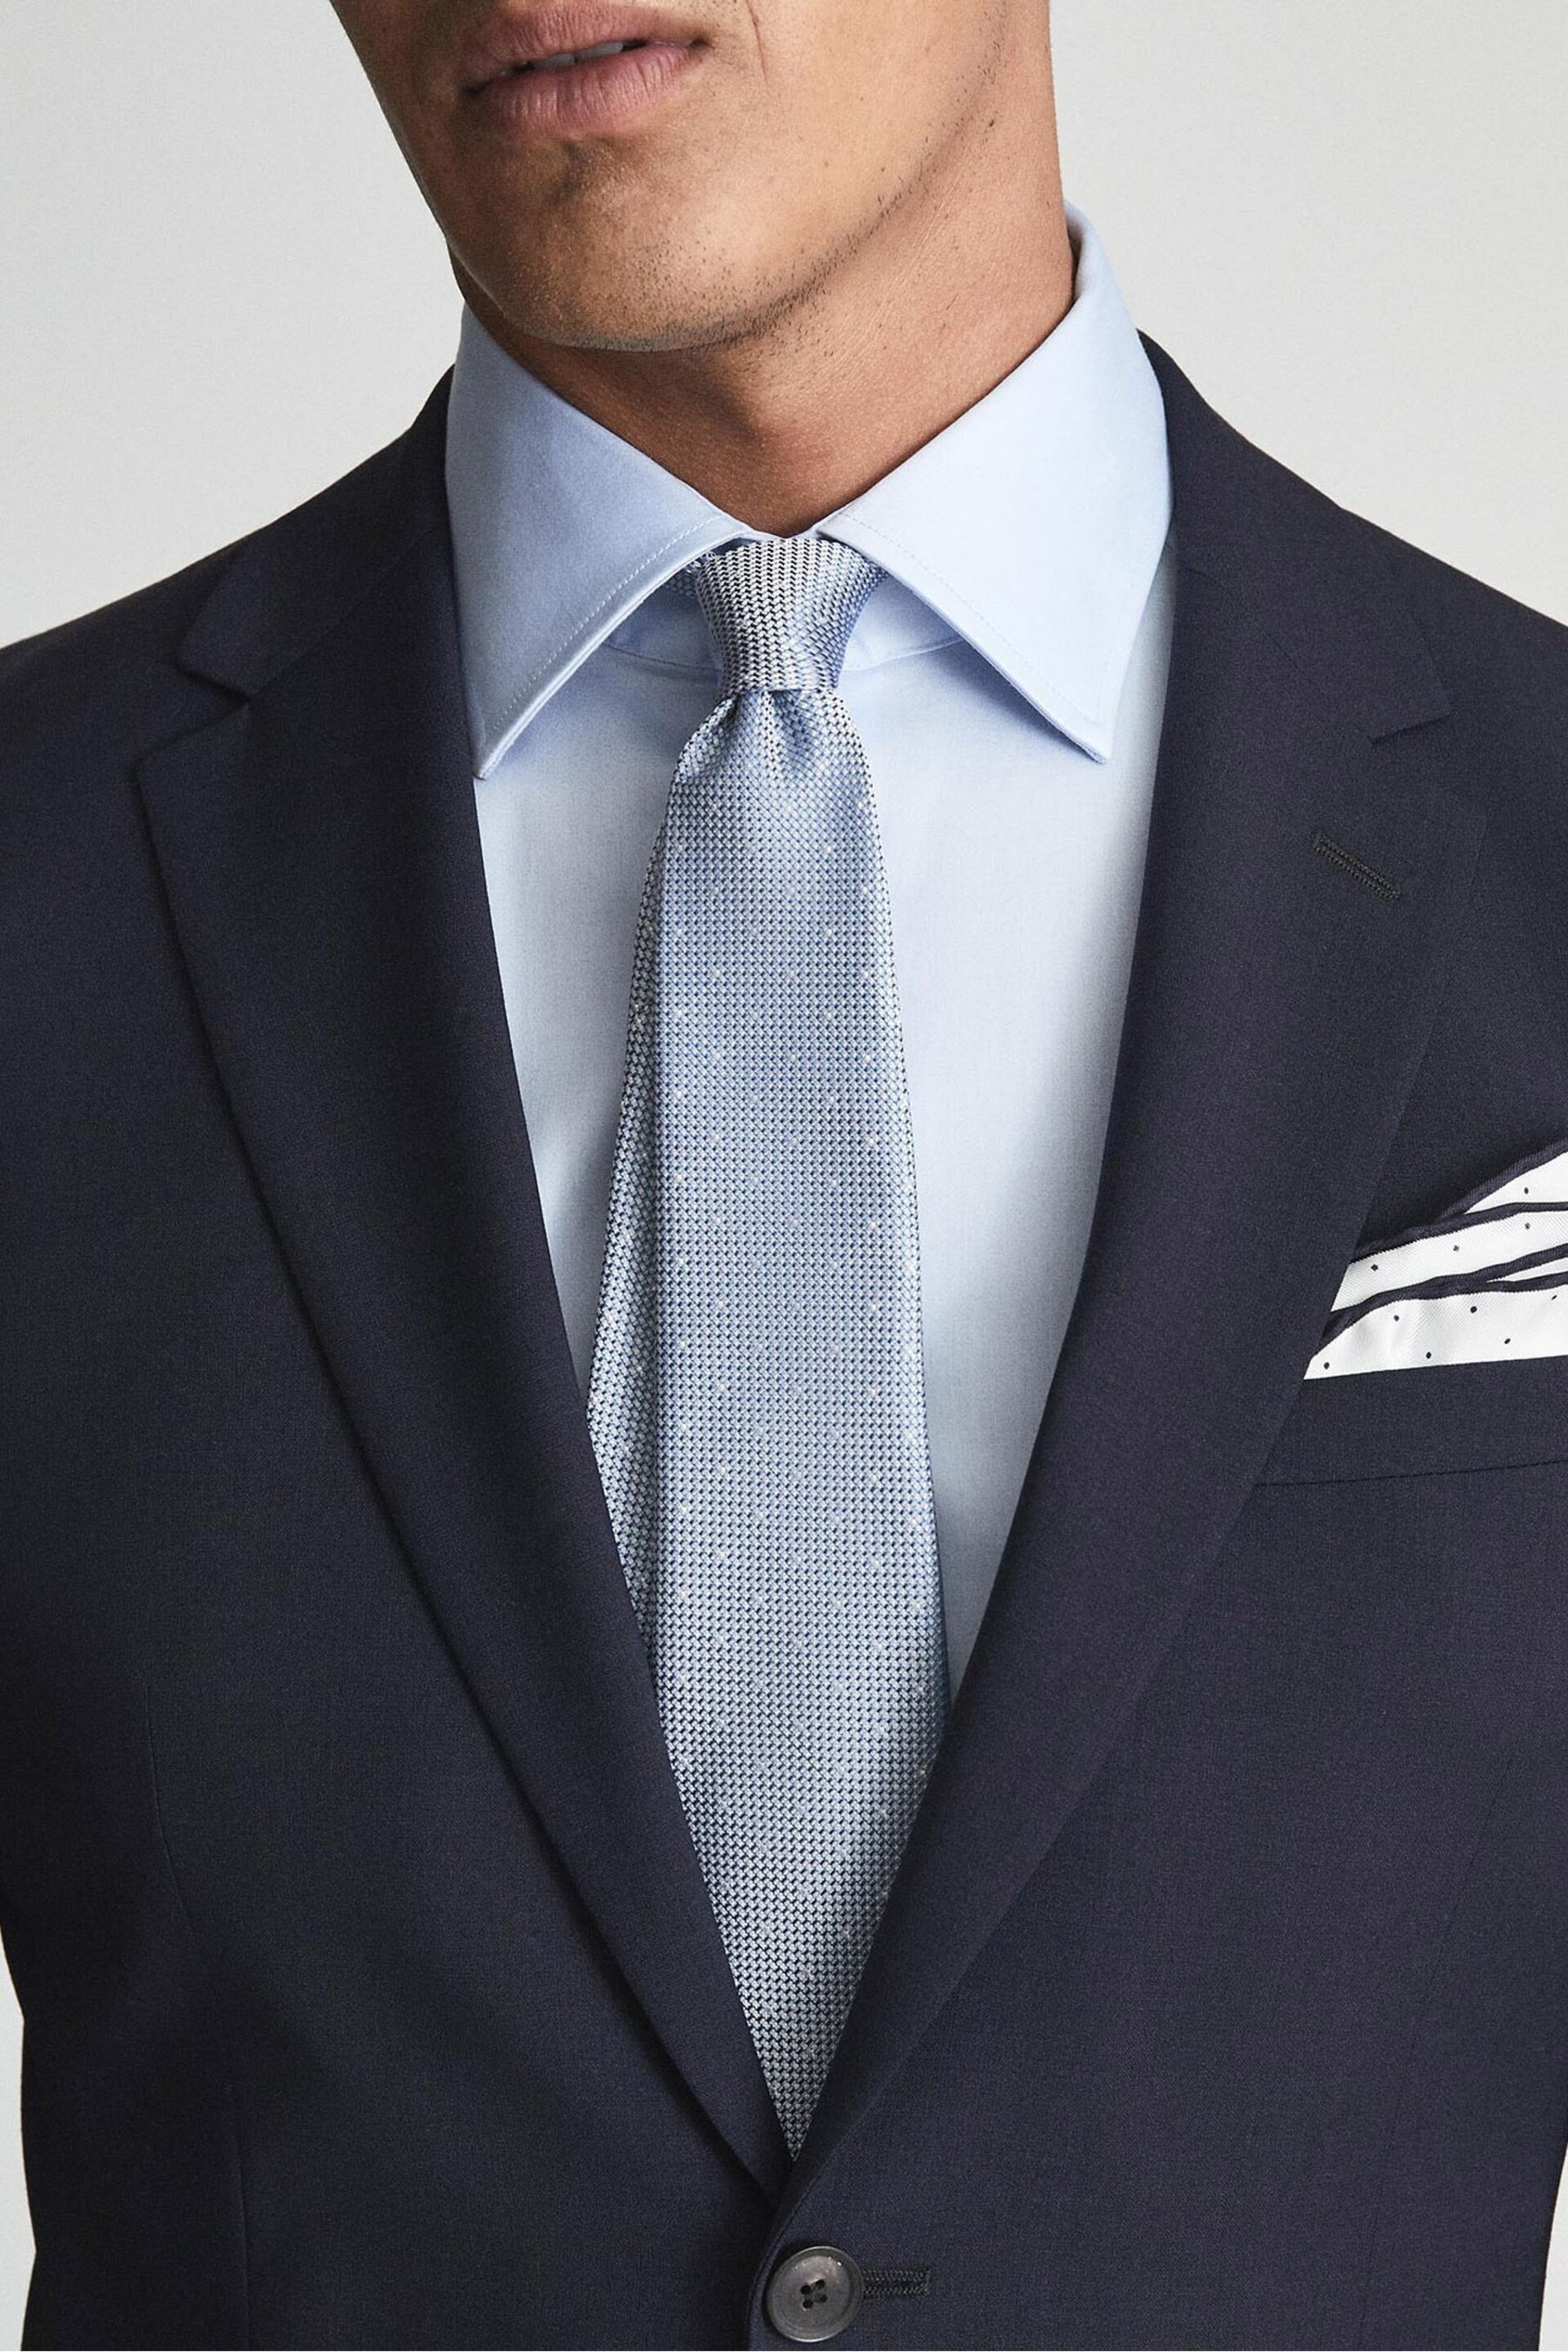 Reiss Airforce Blue Liam Polka Dot Tie - Image 4 of 4